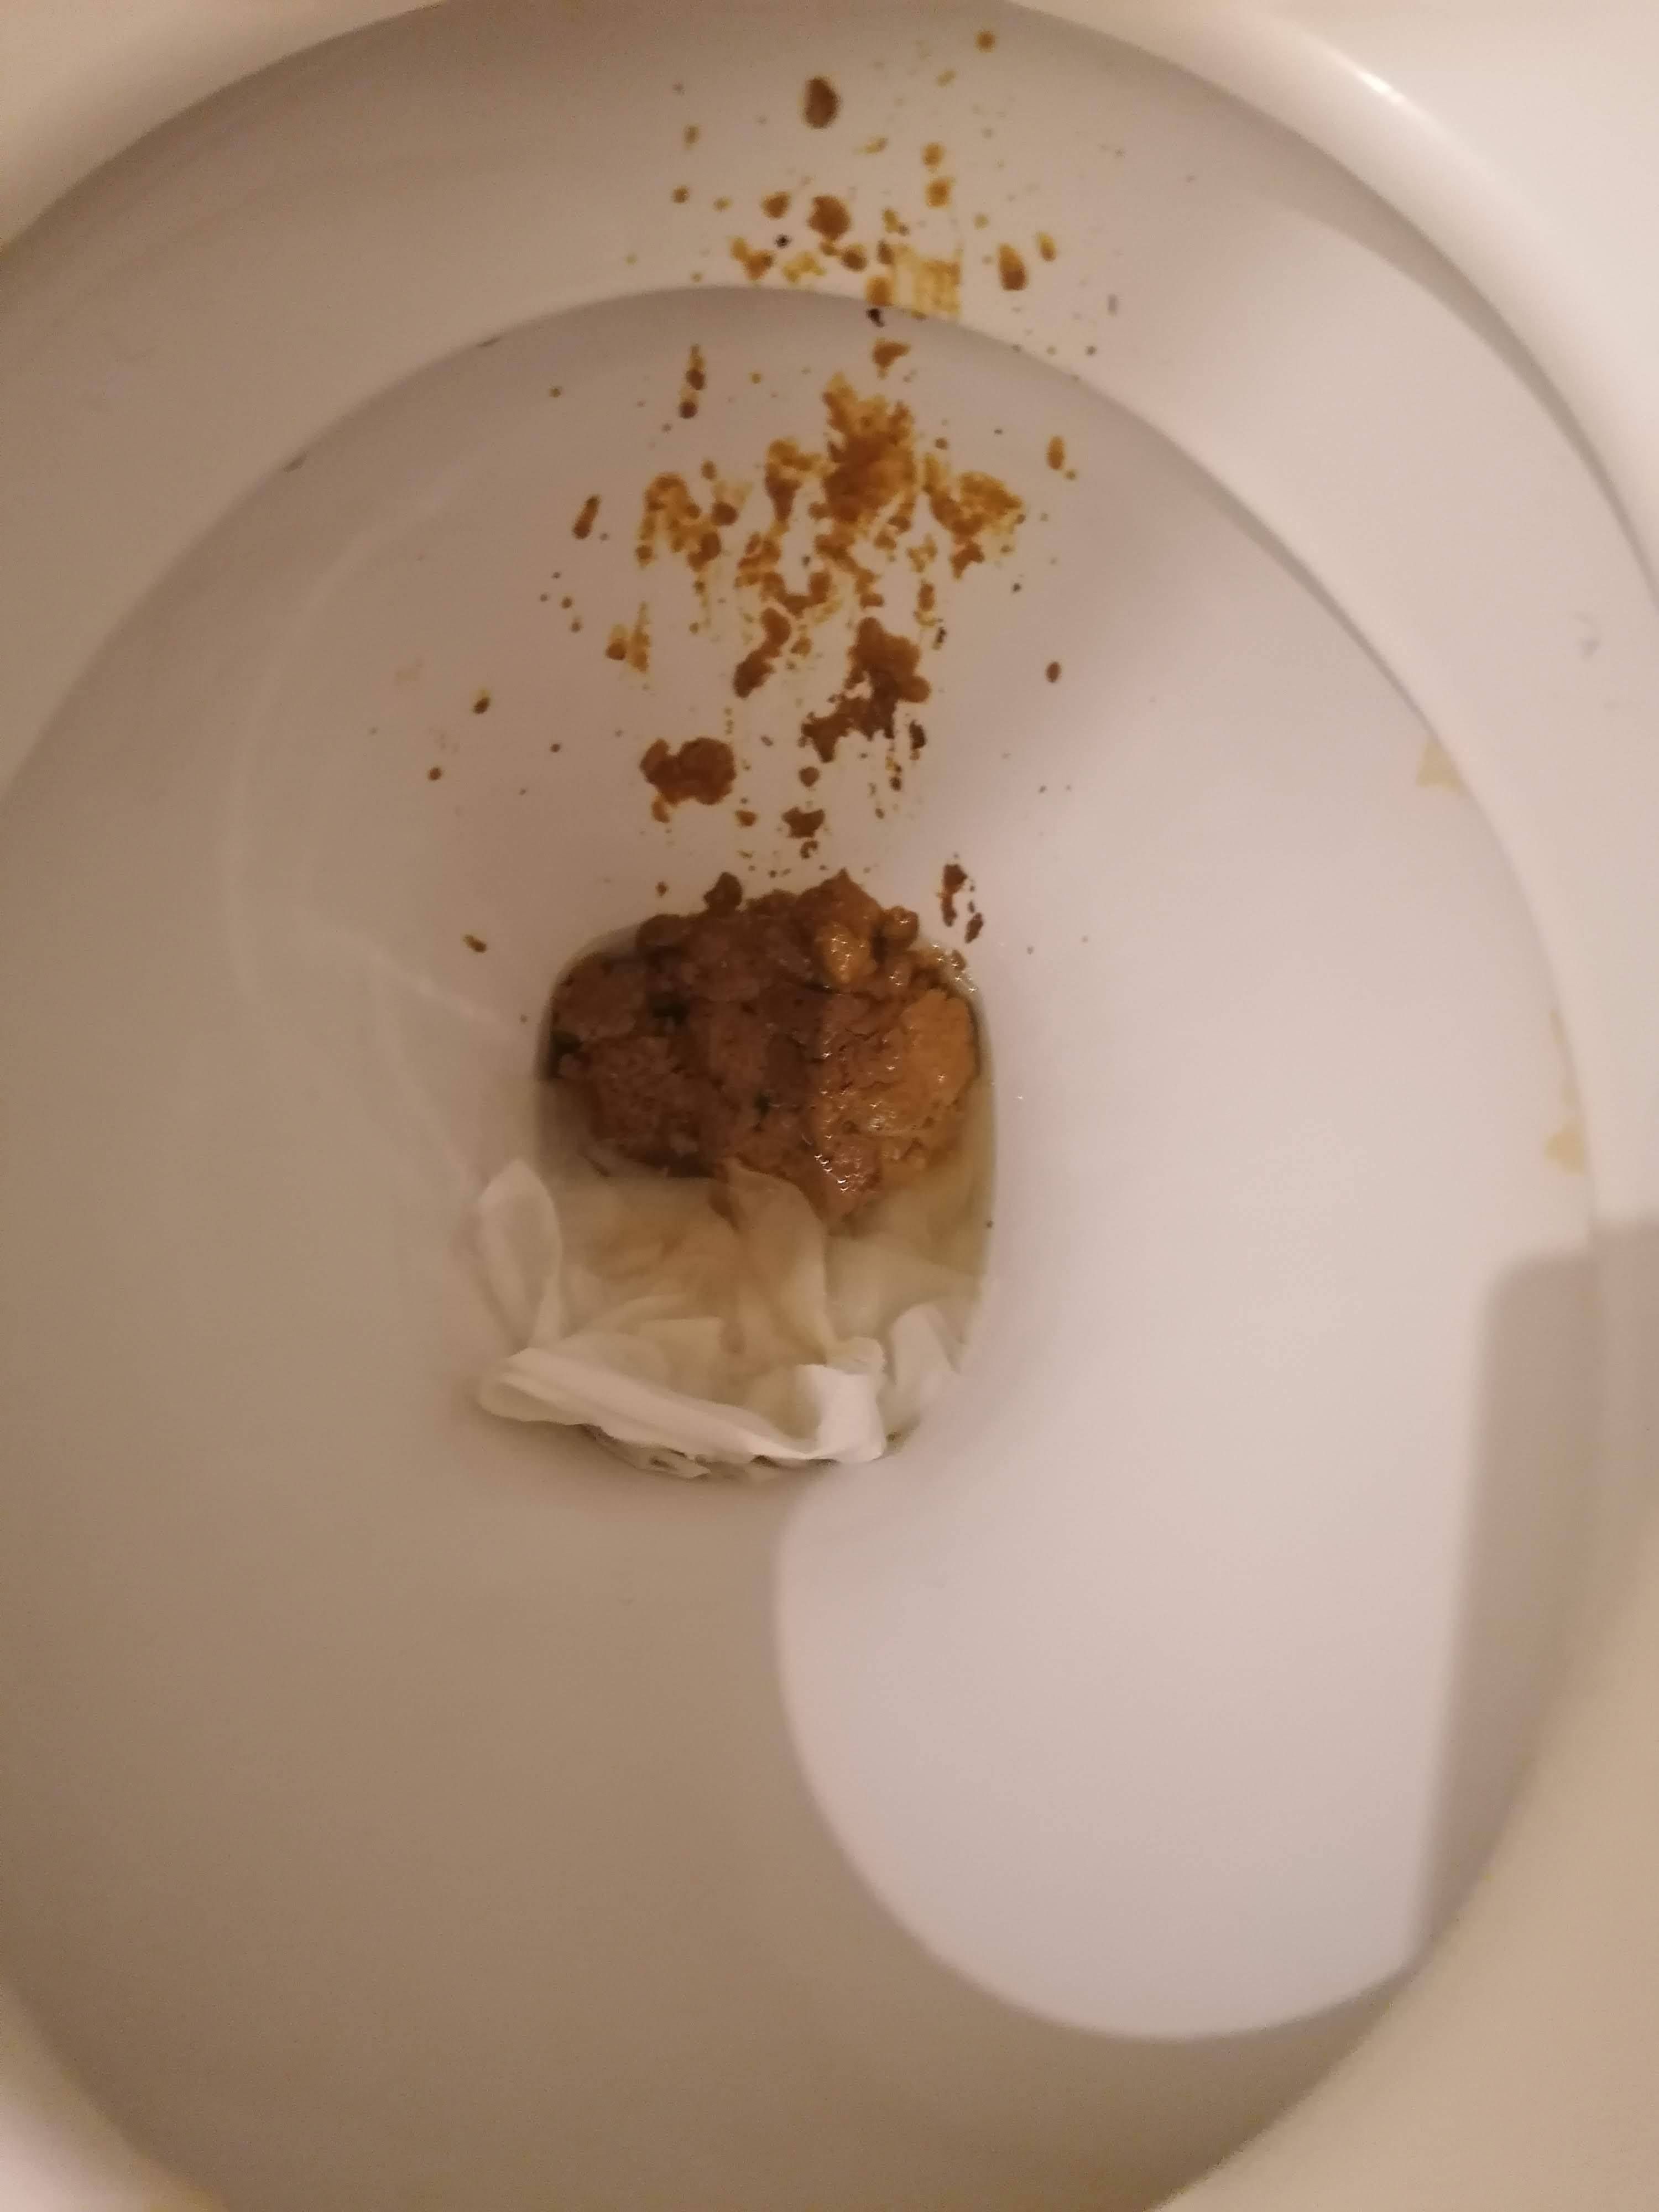 Super desperate shit on mates loo after work not long ago